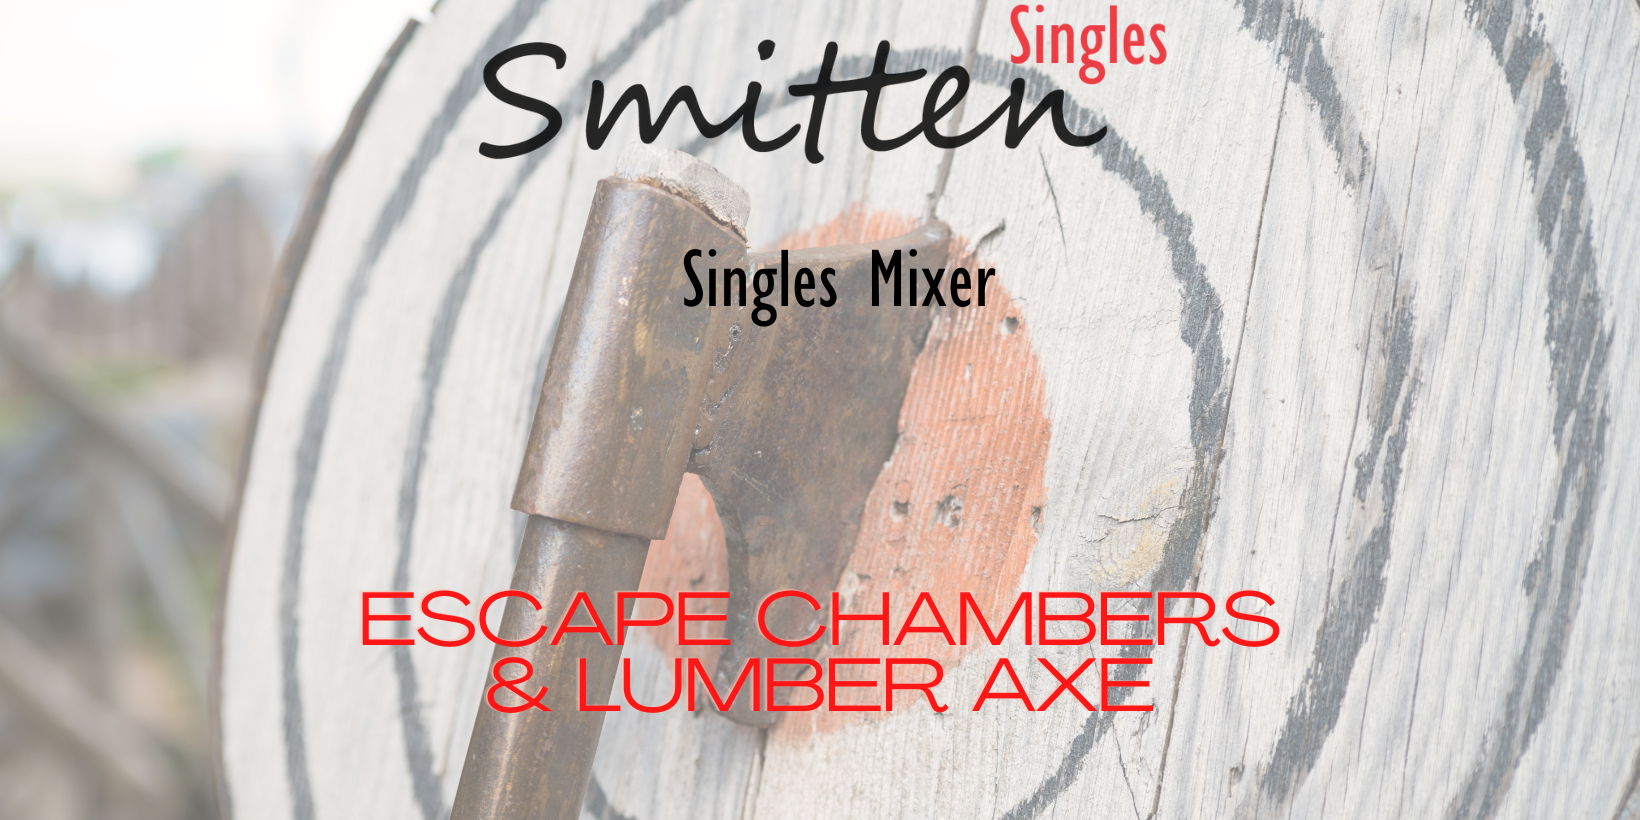 Axe Throwing ~ Singles Mixer promotional image